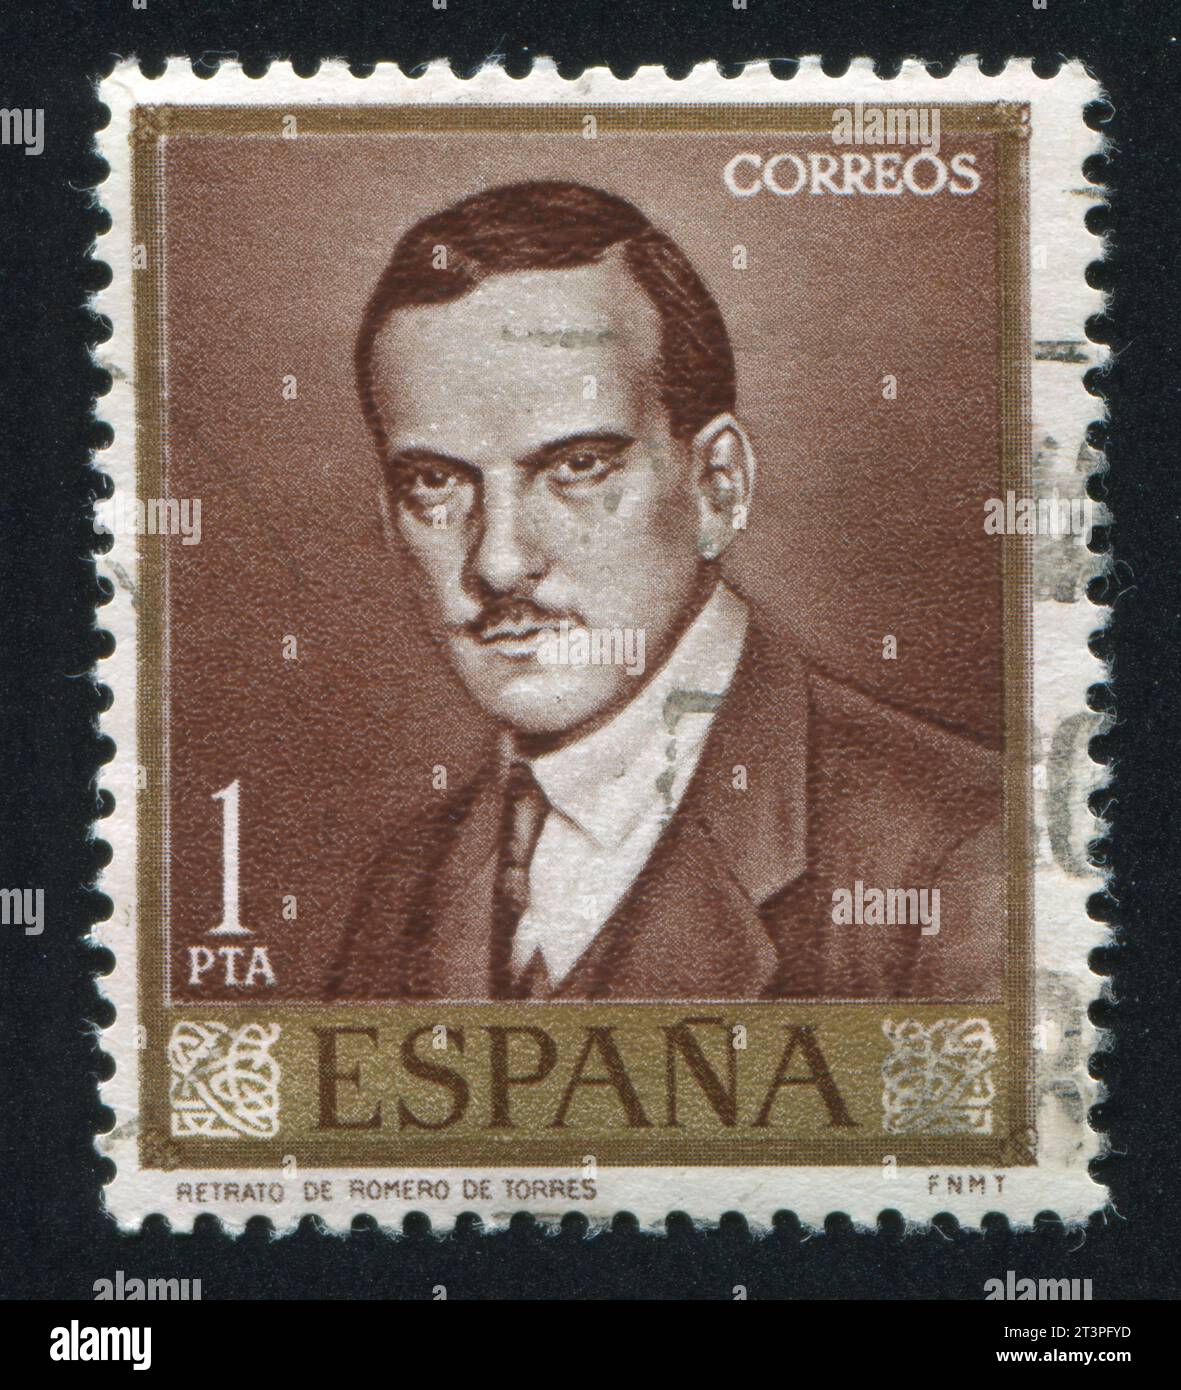 SPAIN- CIRCA 1965: stamp printed by Spain, shows portrait of Julio ...